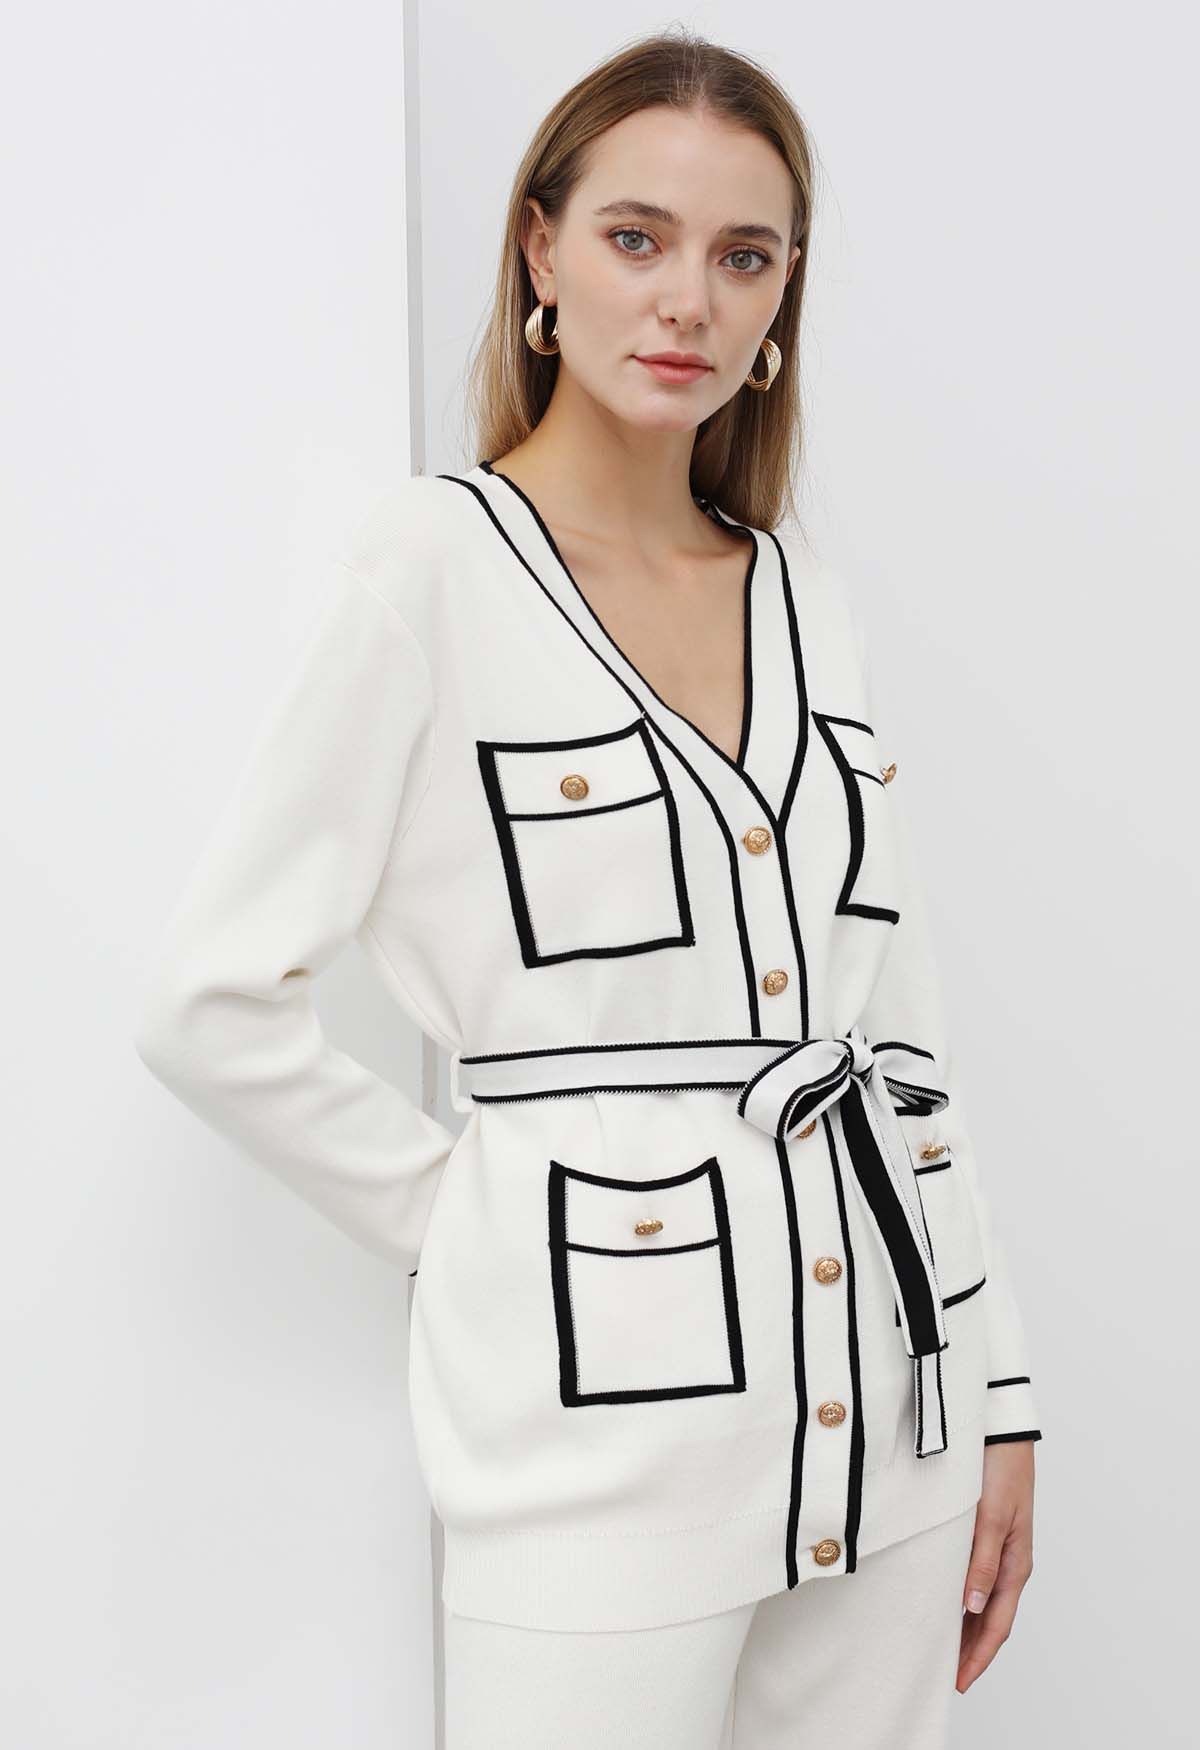 Contrast Edge Buttons Knit Cardigan and Pants Set in White